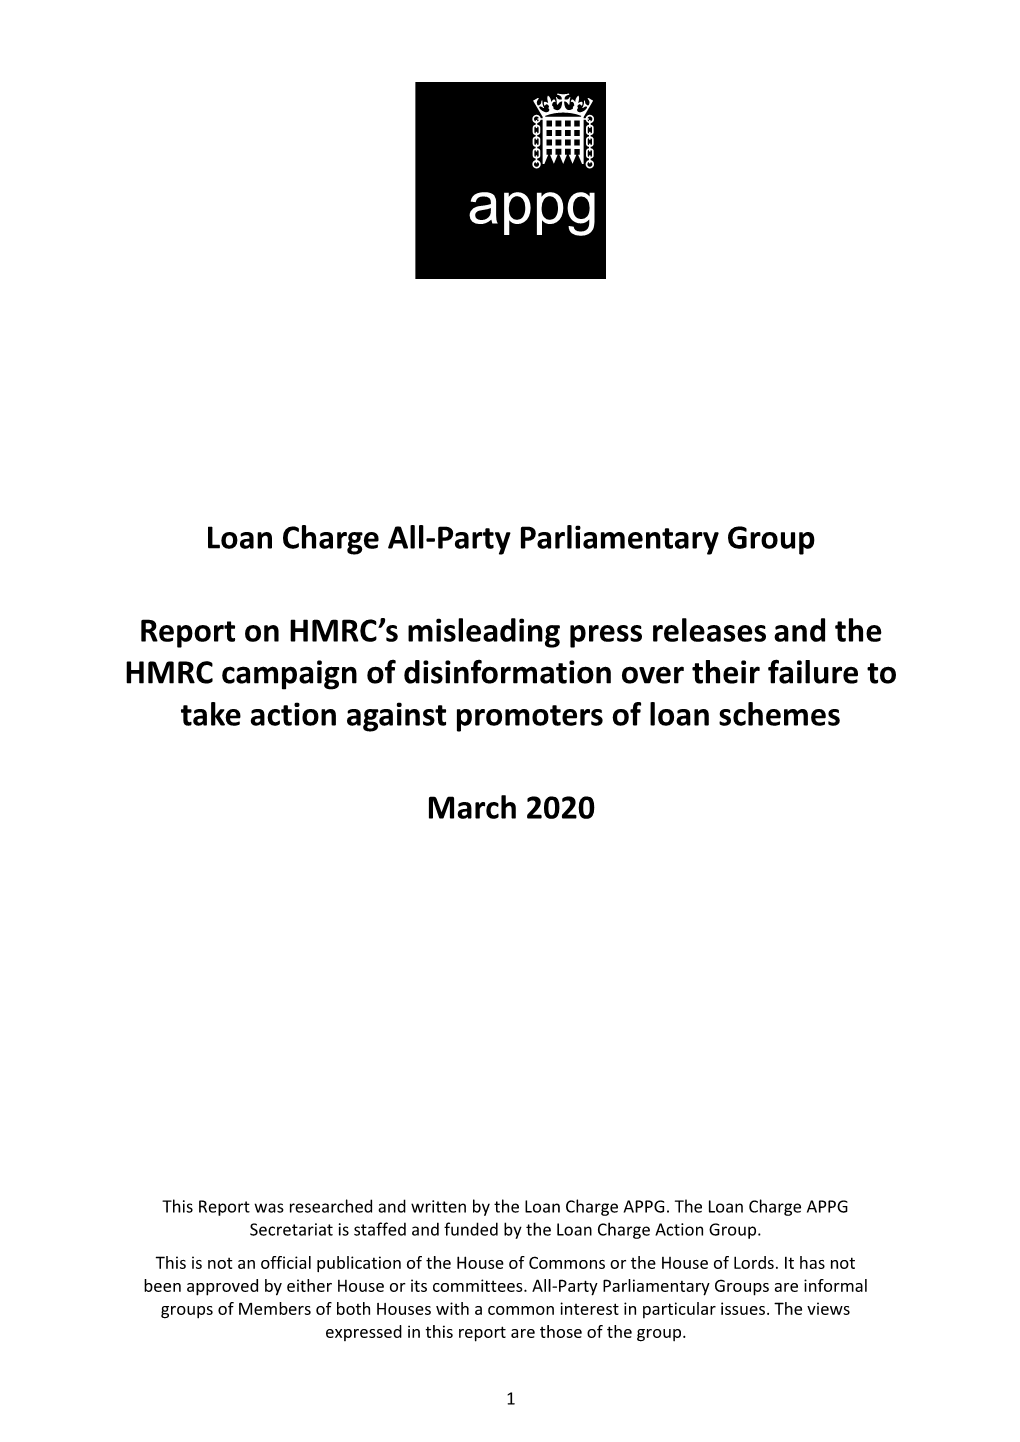 Loan Charge All-Party Parliamentary Group Report on HMRC's